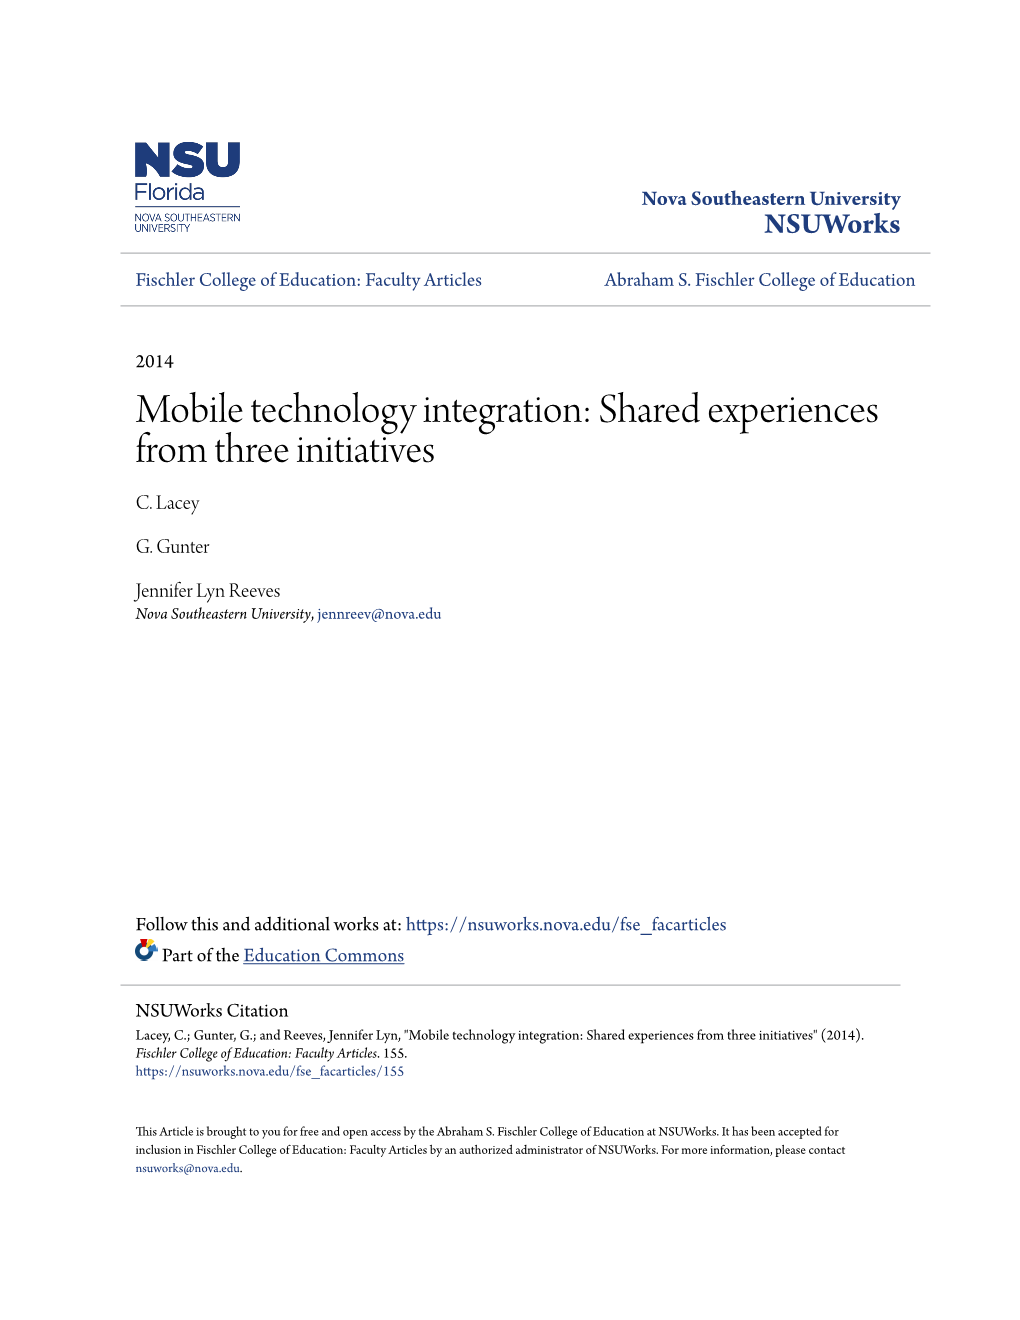 Mobile Technology Integration: Shared Experiences from Three Initiatives C